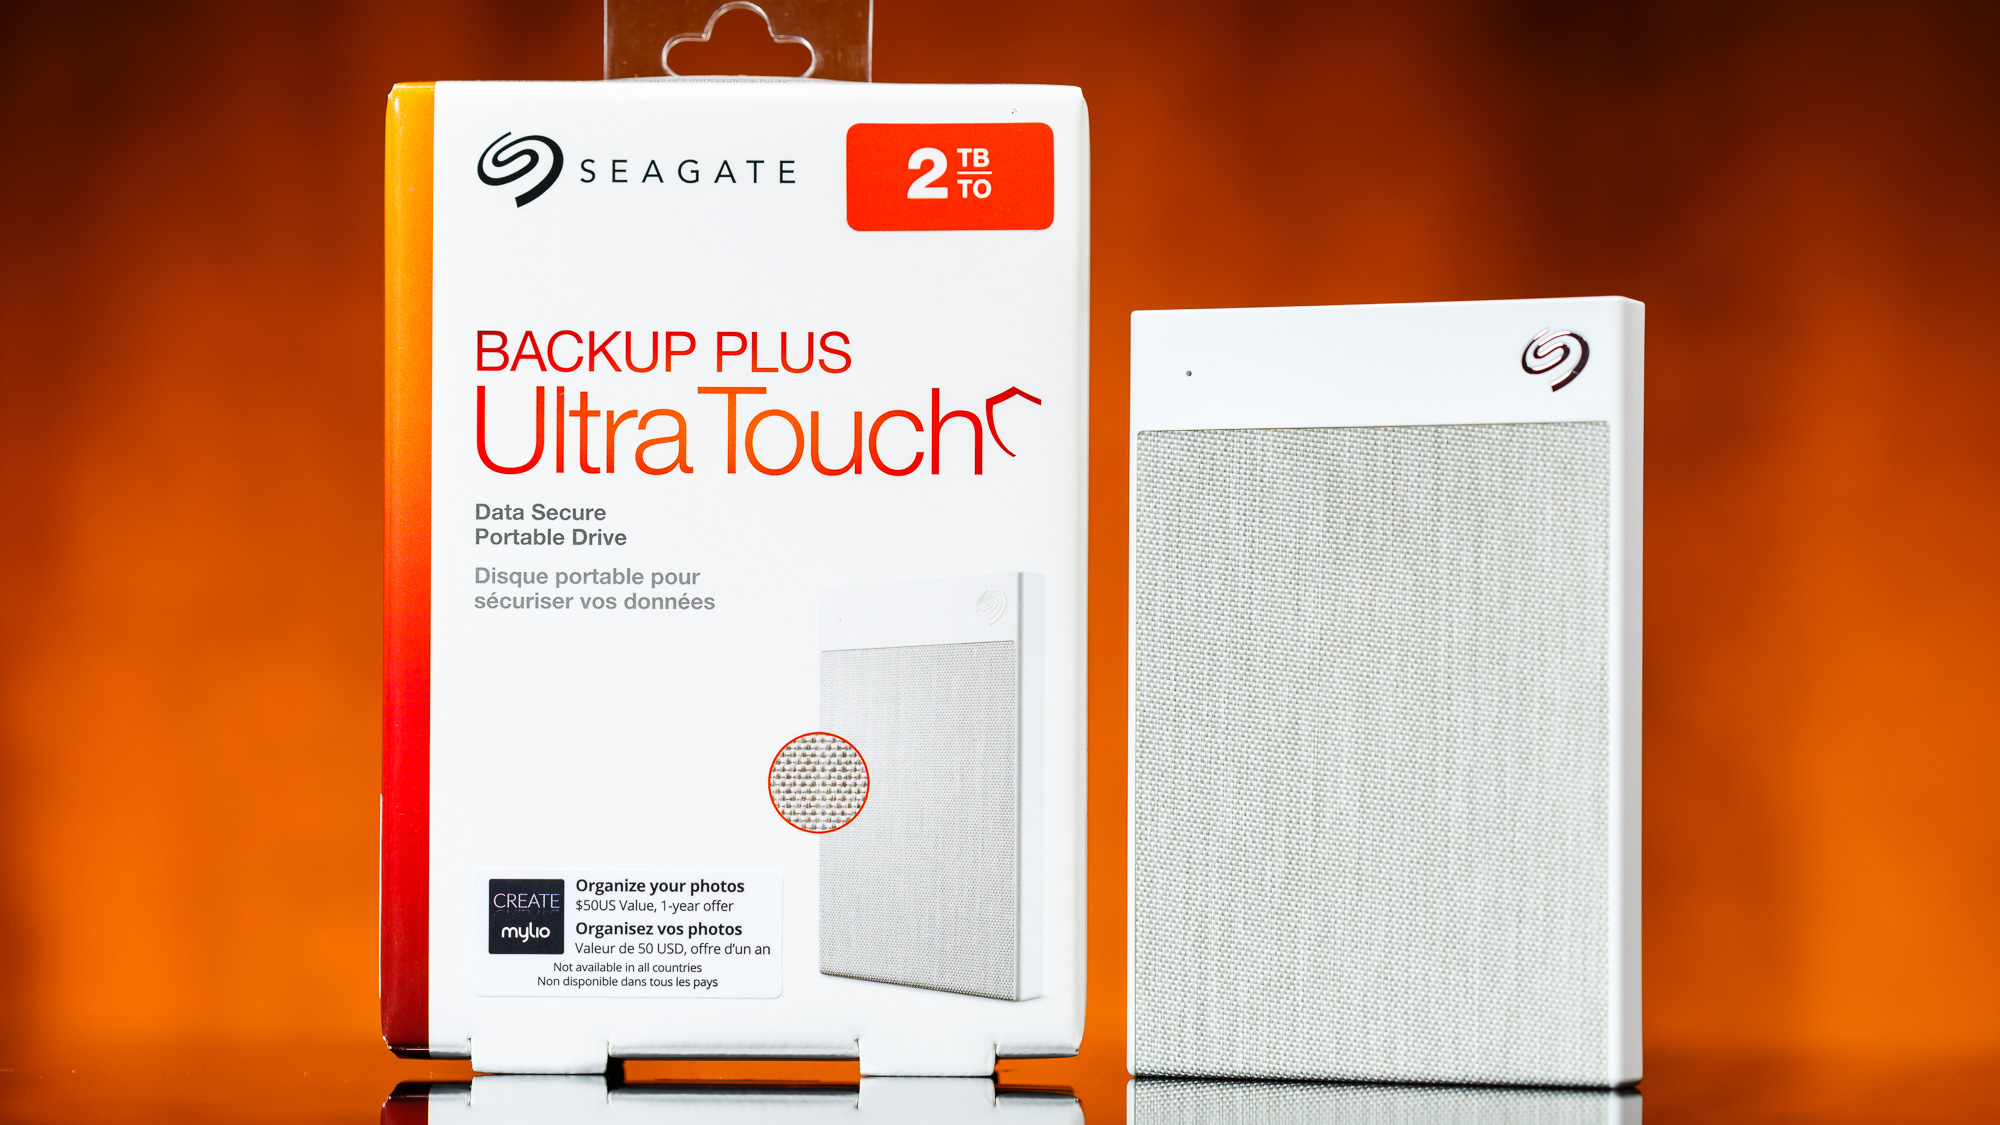 Seagate Backup Plus Ultra Touch Portable HDD (kredit: Tom's Hardware)